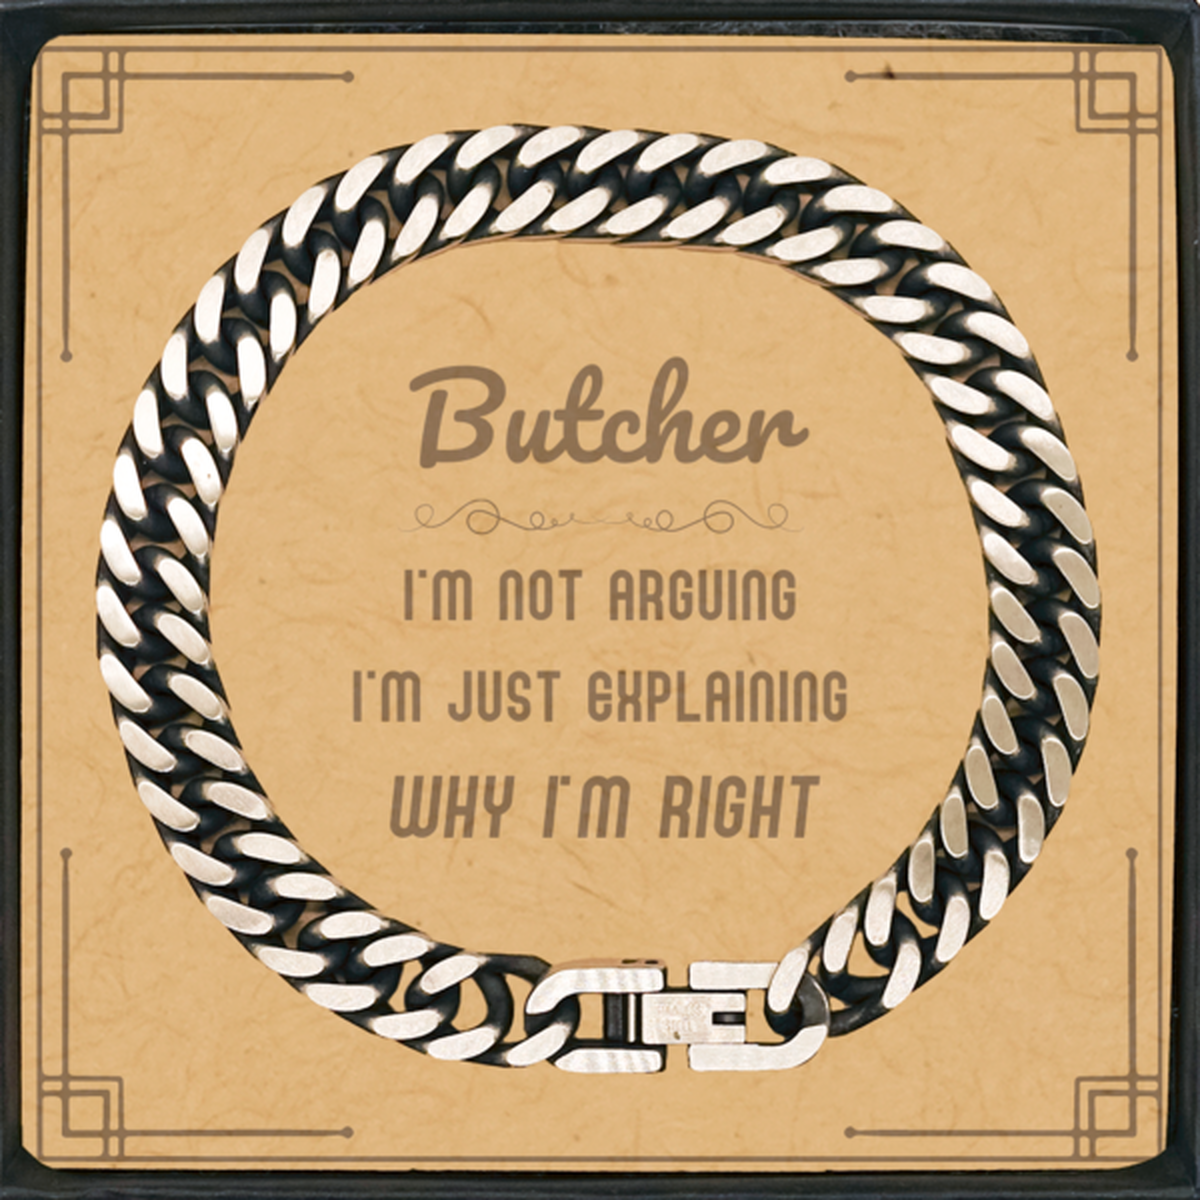 Butcher I'm not Arguing. I'm Just Explaining Why I'm RIGHT Cuban Link Chain Bracelet, Funny Saying Quote Butcher Gifts For Butcher Message Card Graduation Birthday Christmas Gifts for Men Women Coworker